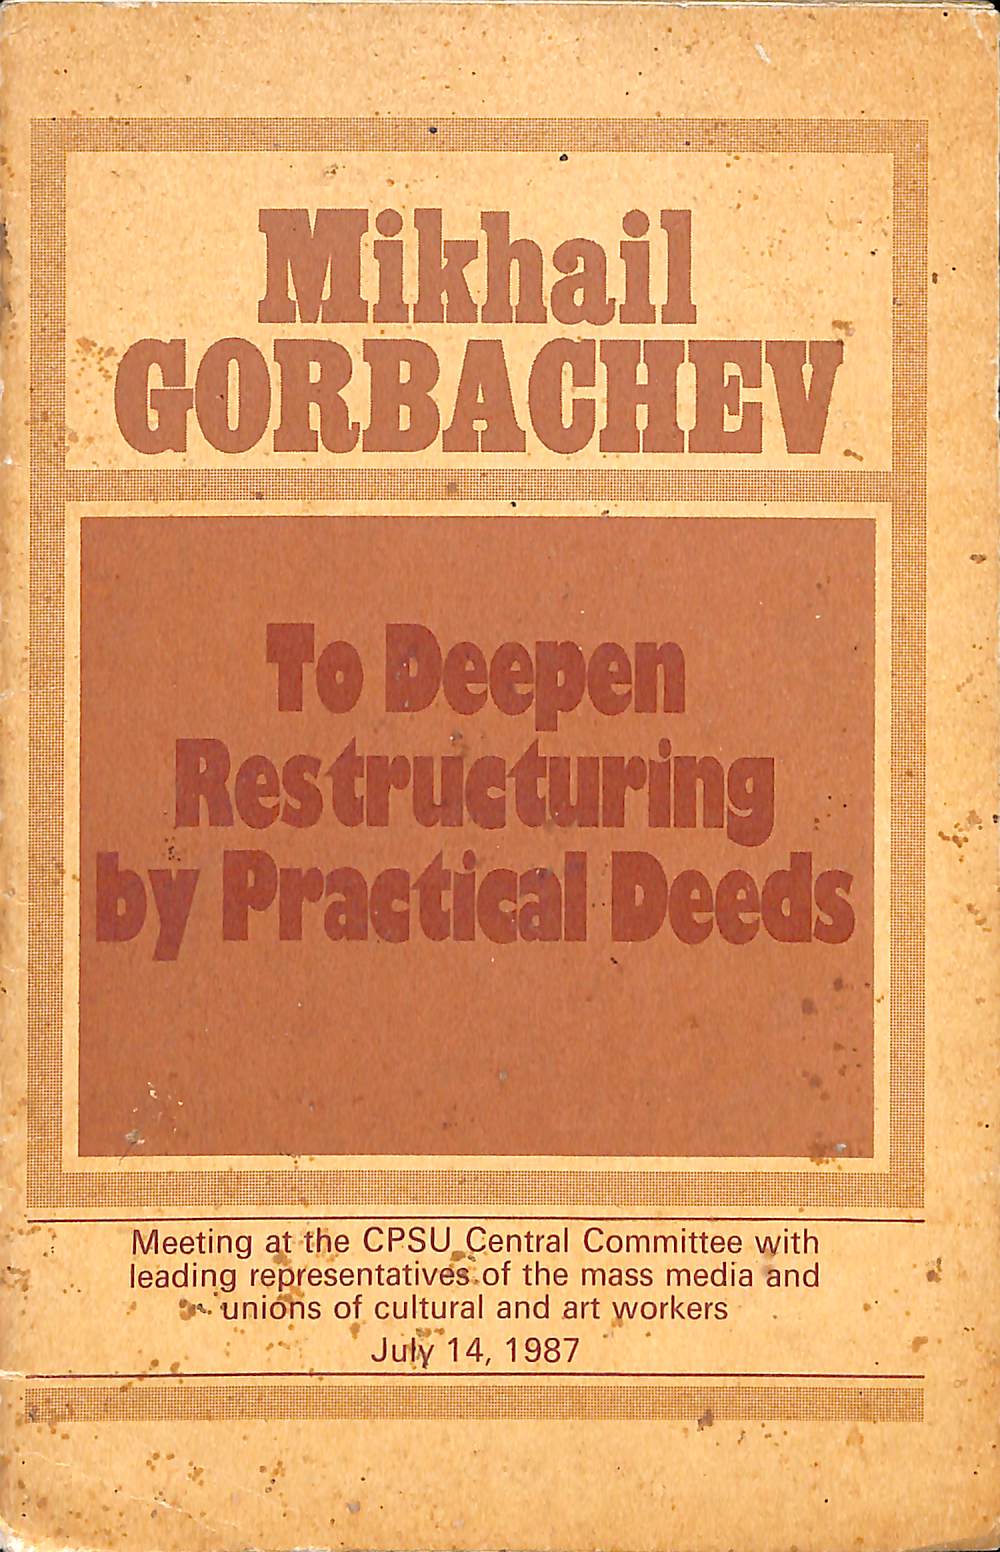 To deepen restructuring by practical deeds